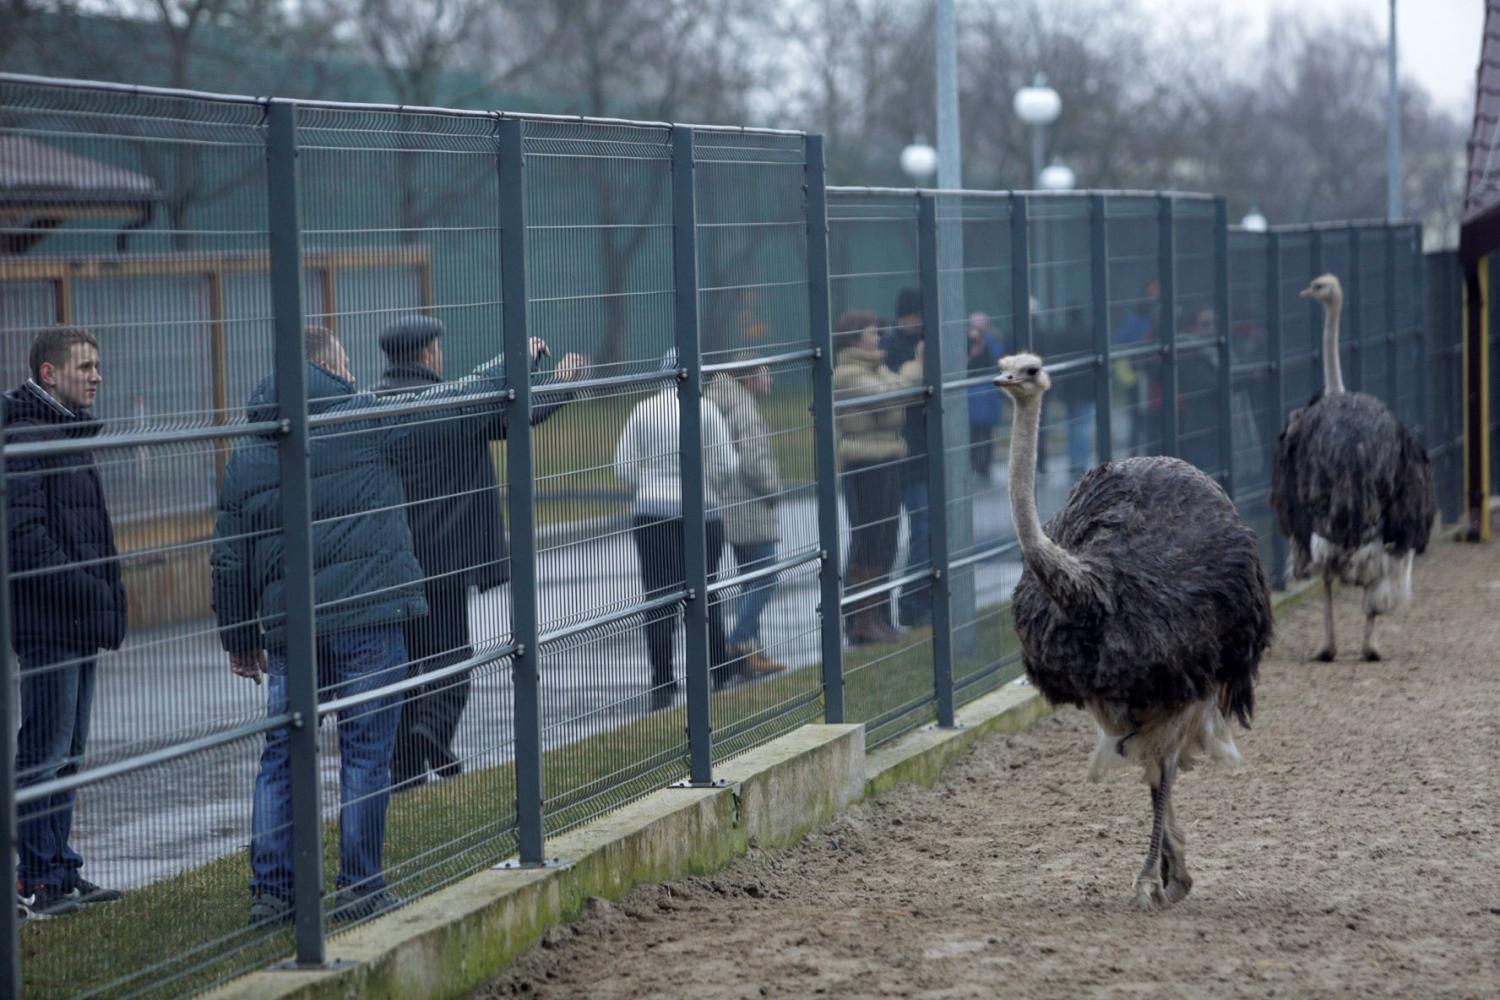 Anti-government protesters and journalists look at ostriches kept within an enclosure on the grounds of the Mezhyhirya residence of Ukraine's President Viktor Yanukovych in the village Novi Petrivtsi, outside Kyiv February 22, 2014.